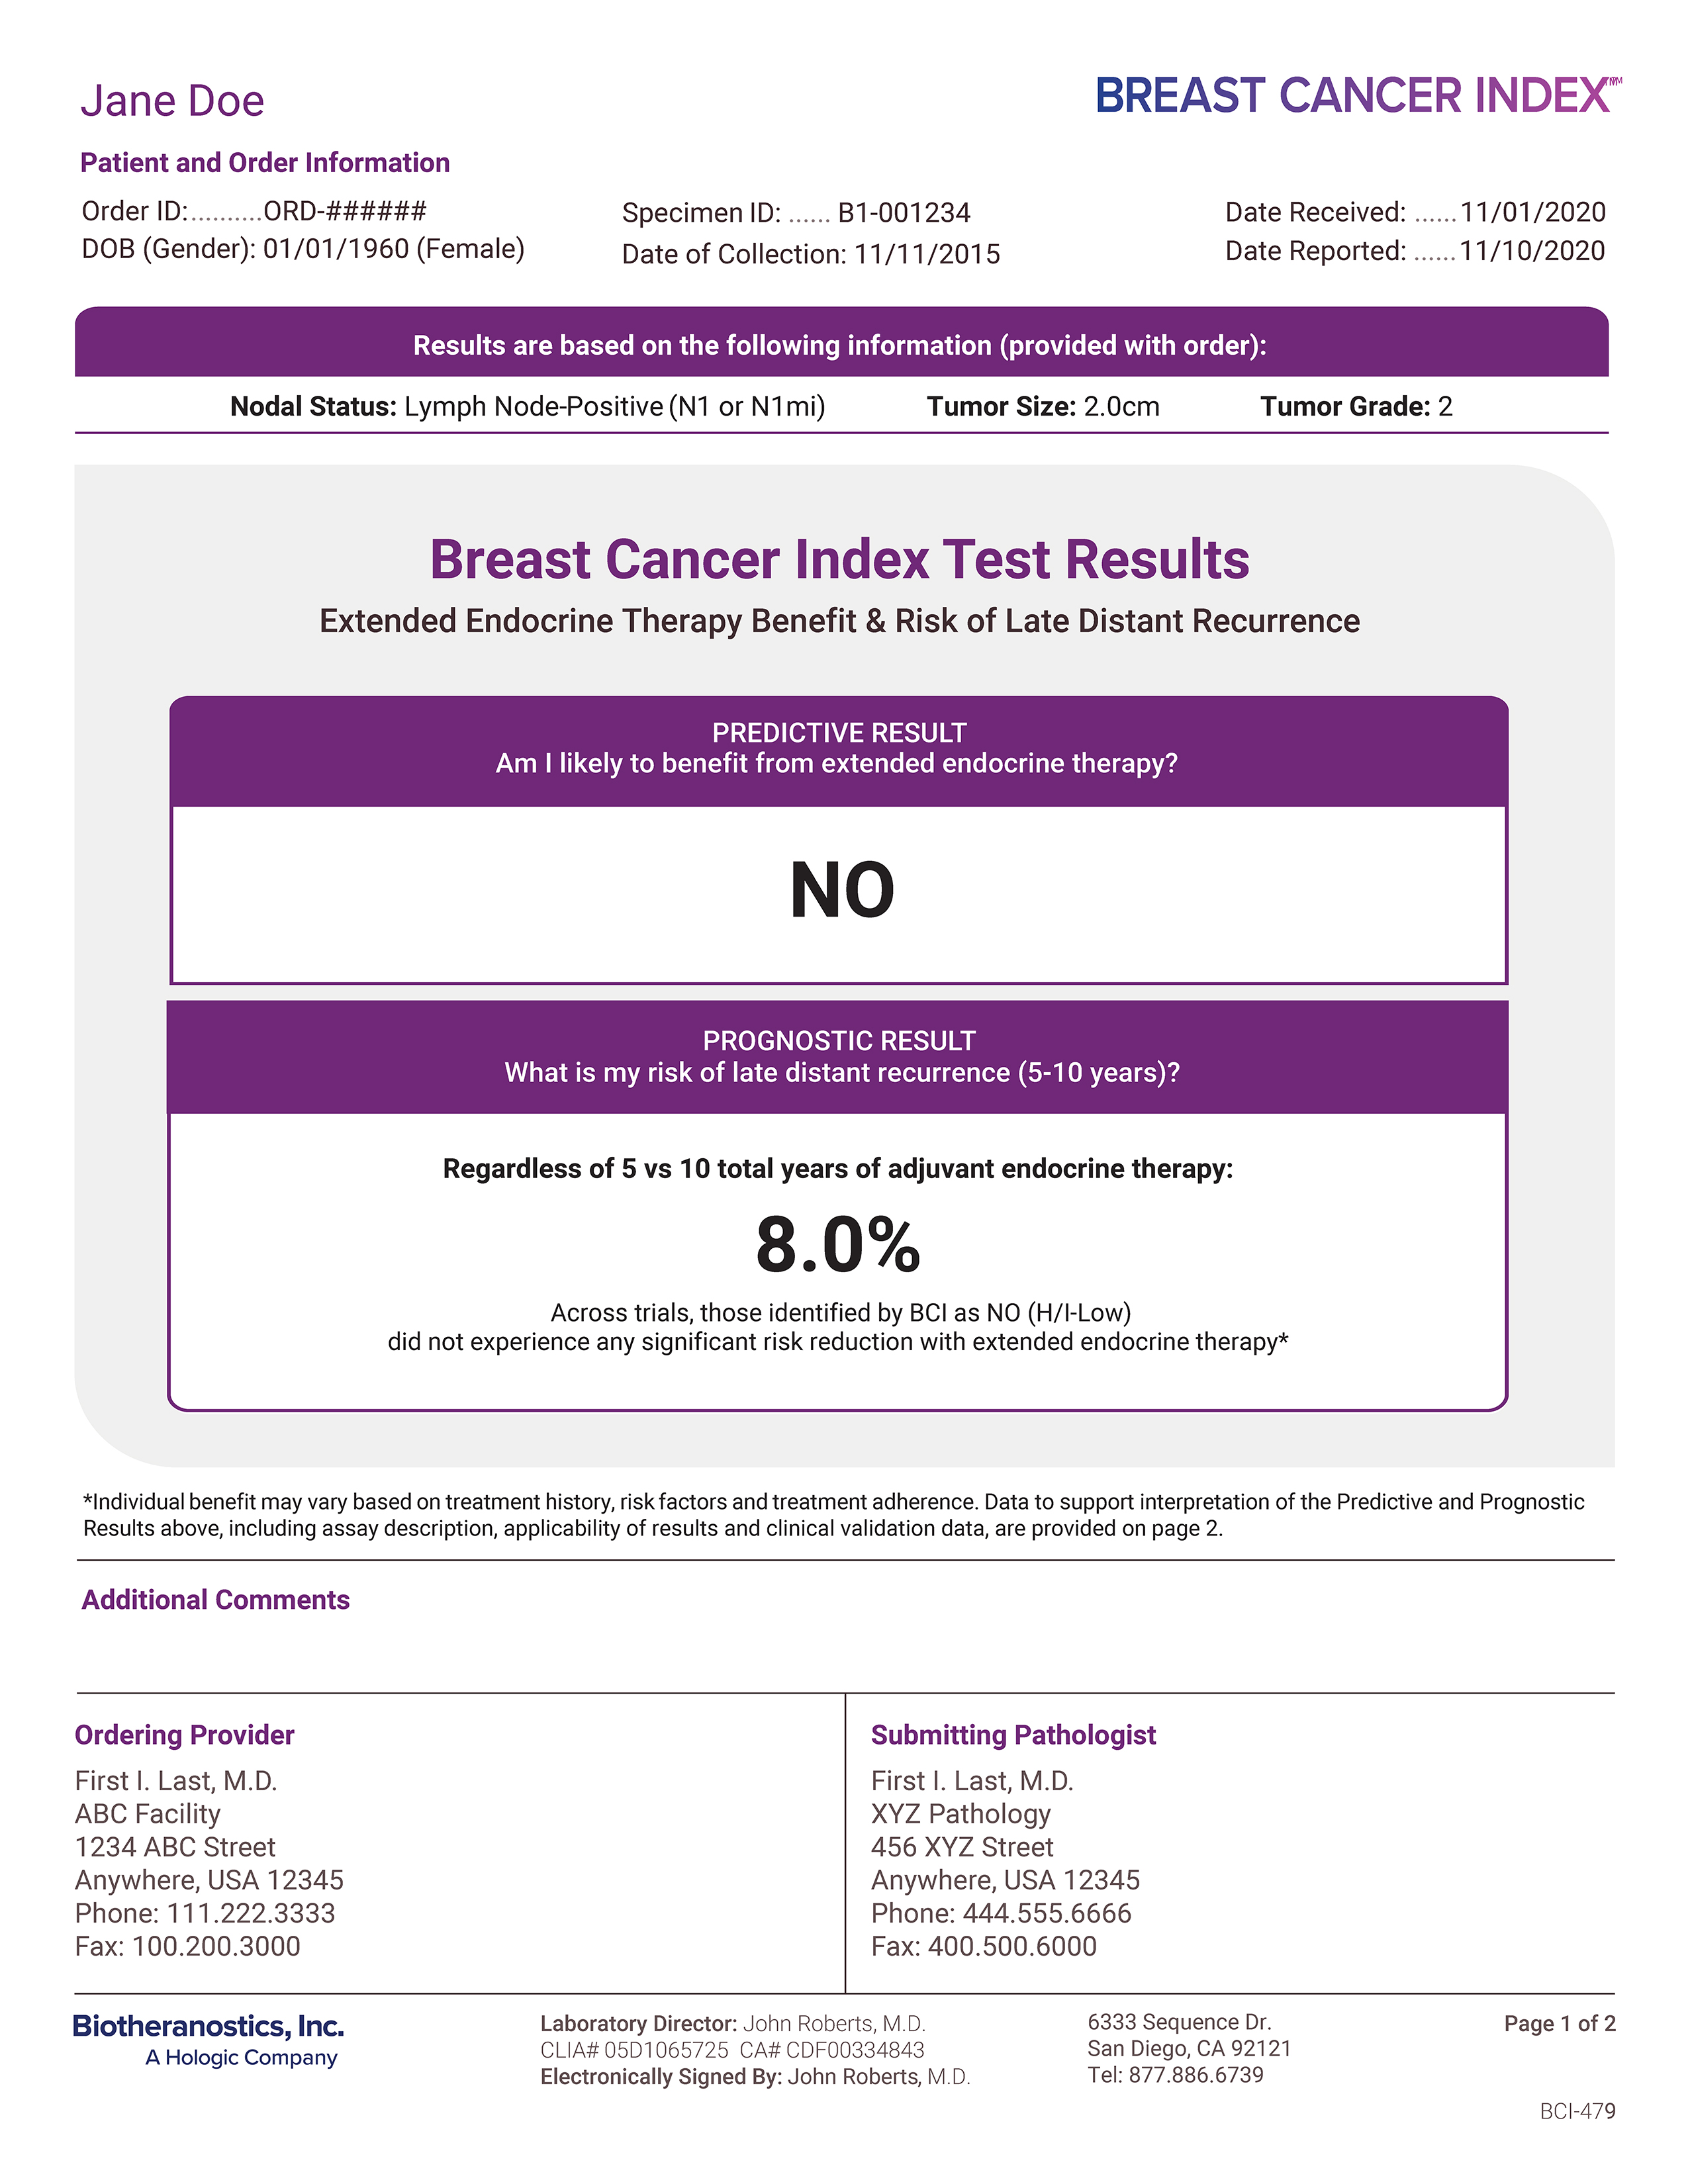 Breast Cancer Index